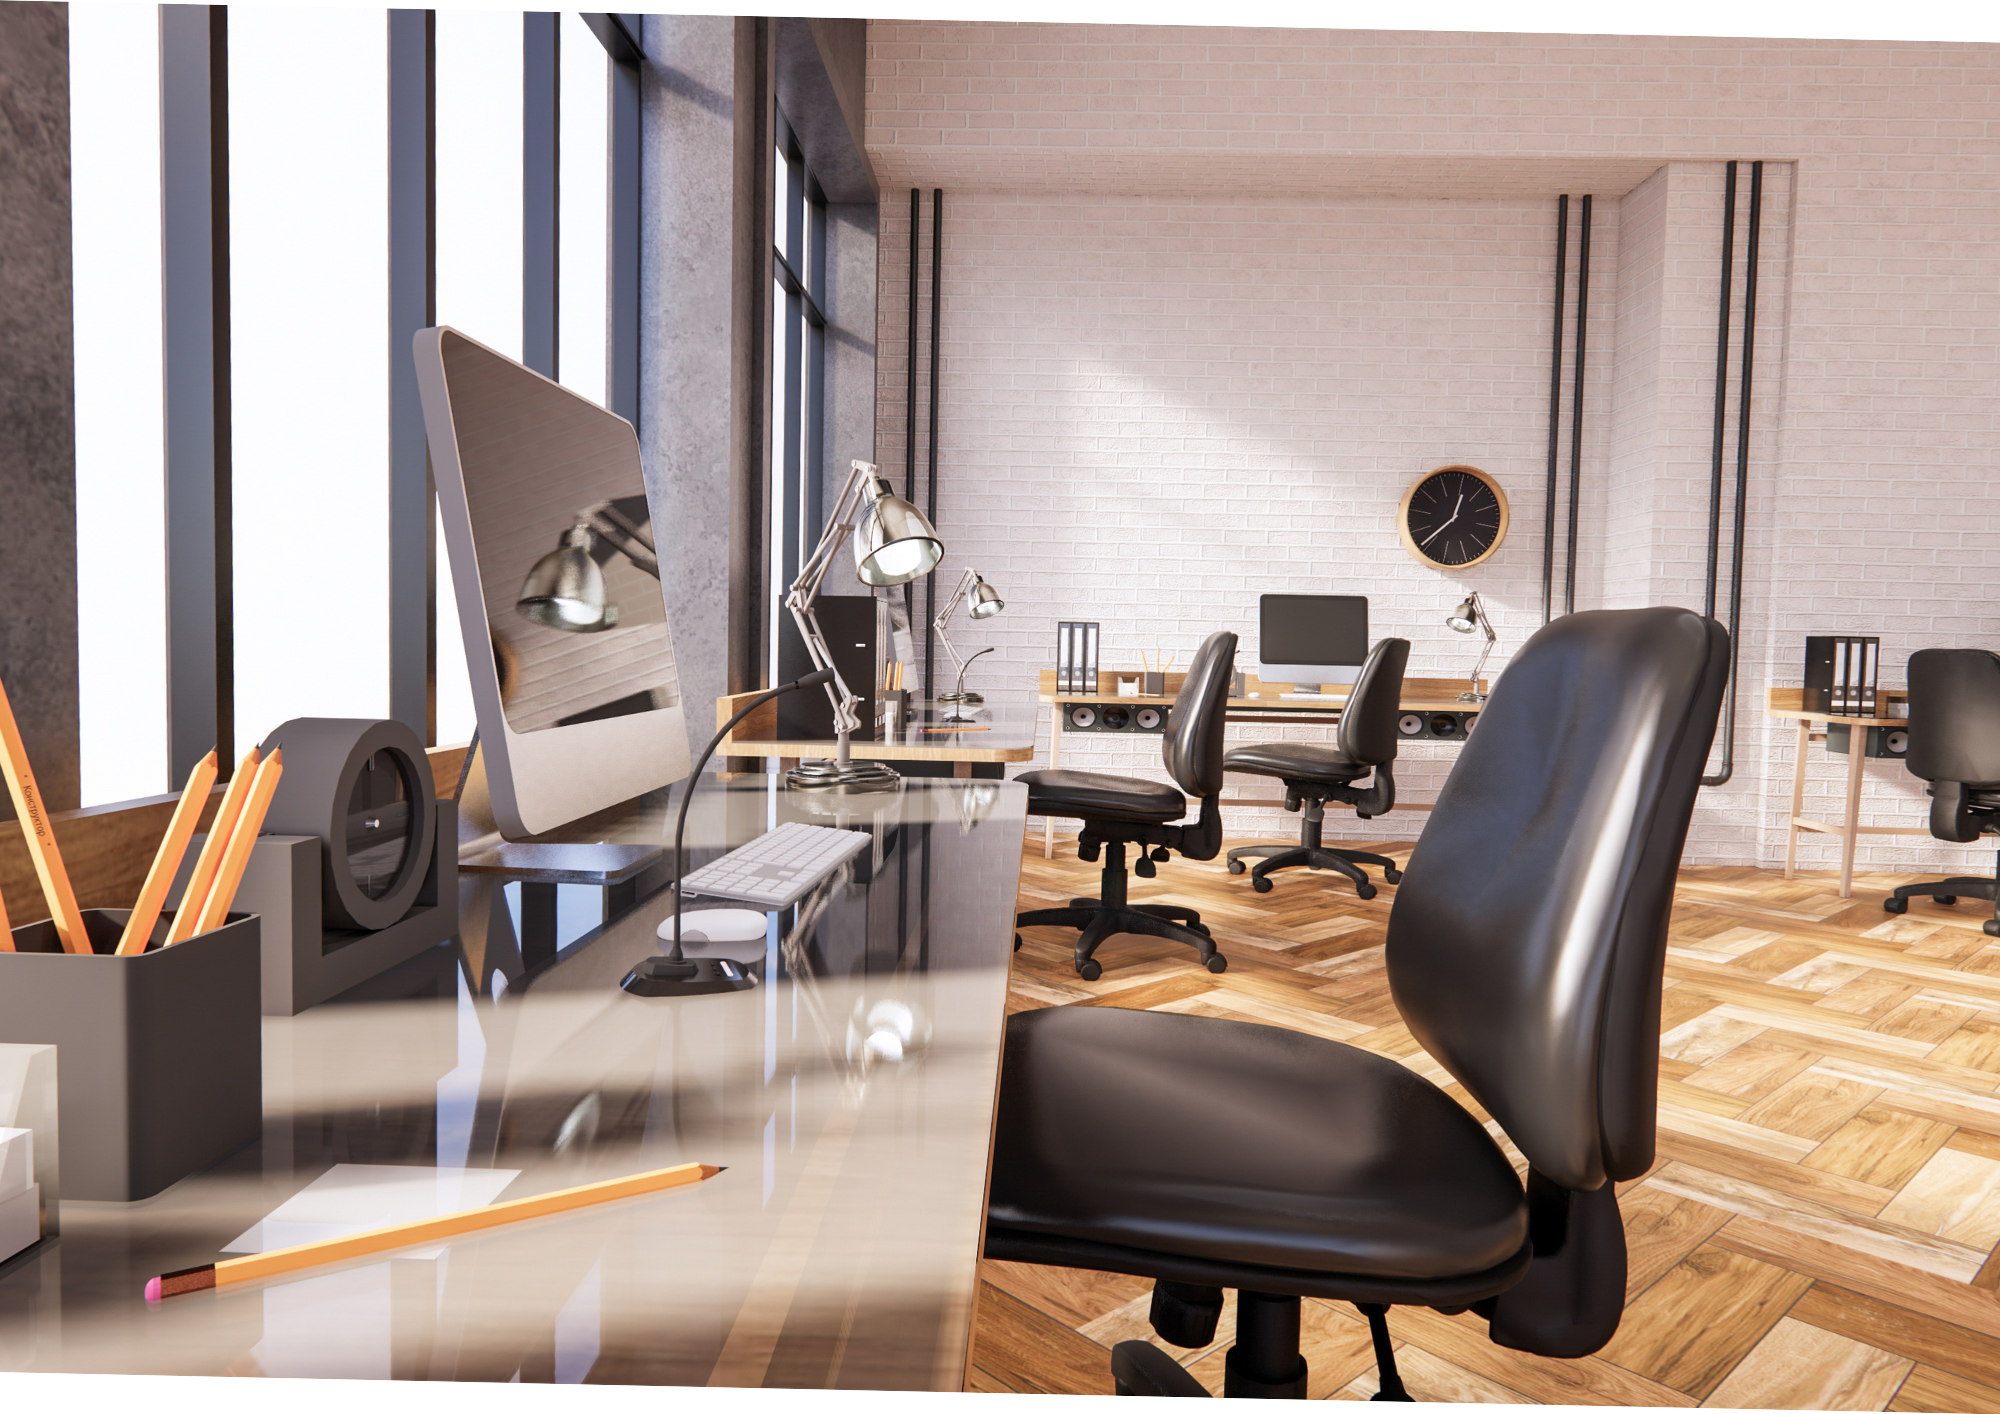 Saddle Chairs vs. Traditional Office Chairs| Sit Healthier